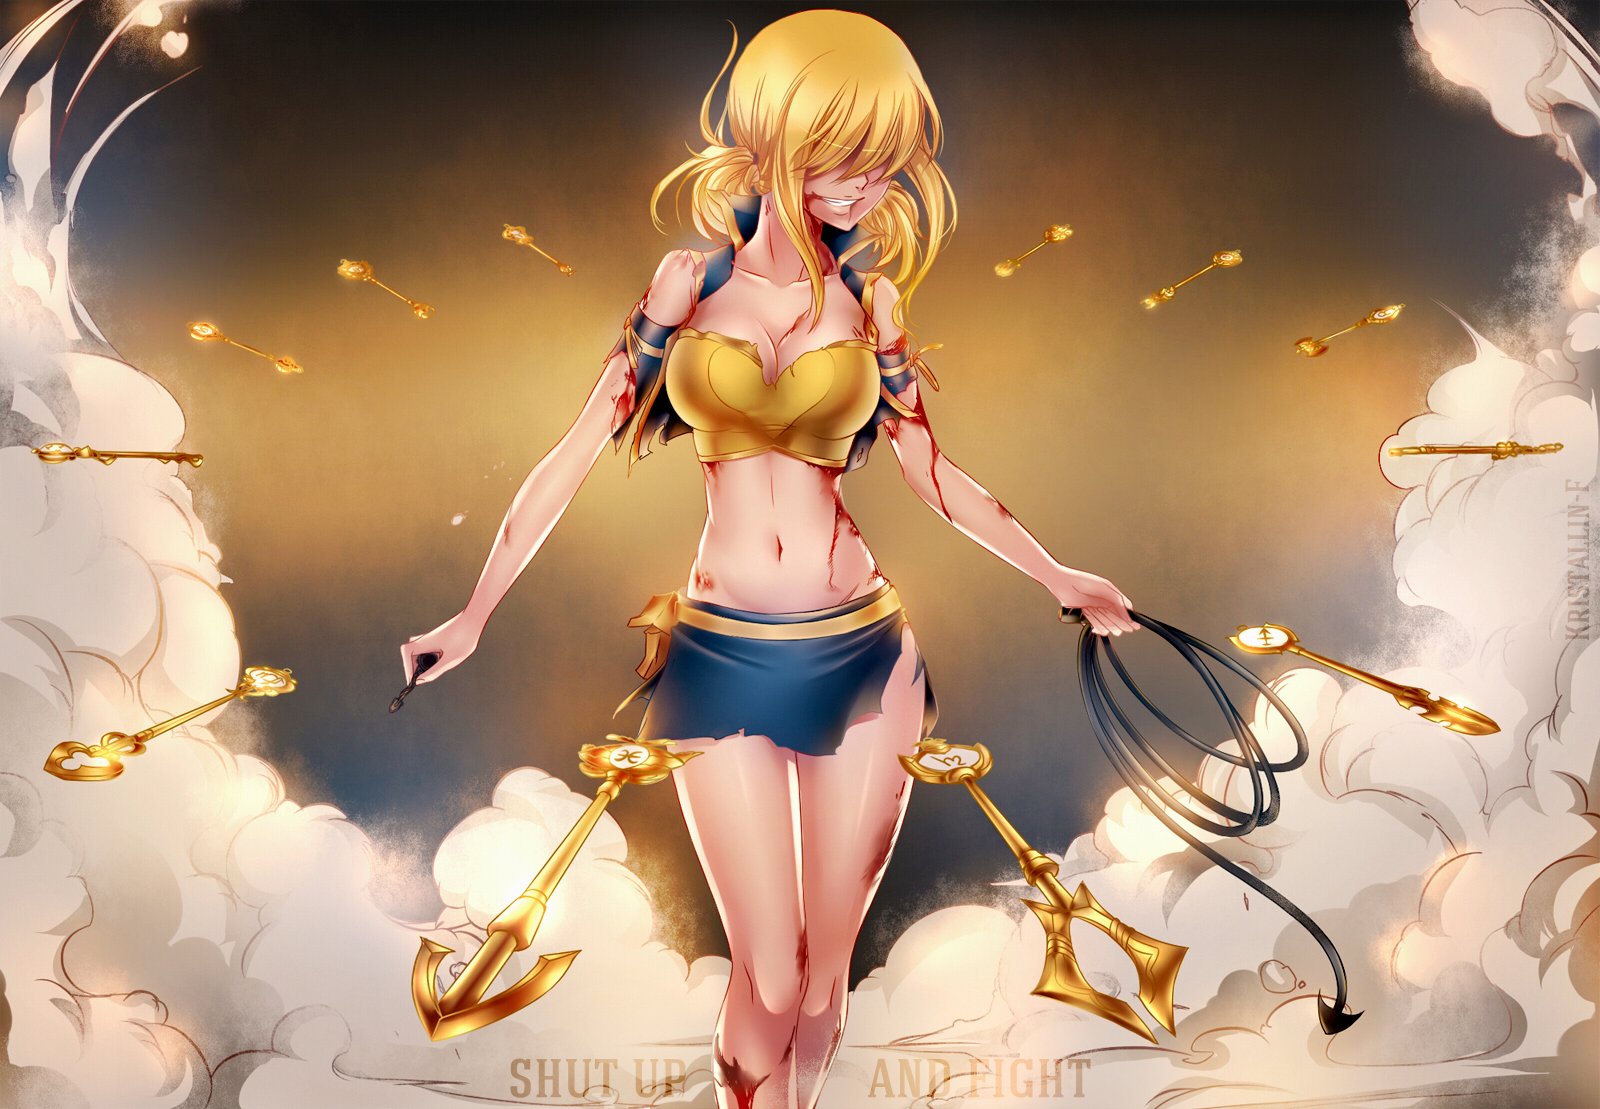 Free Download Lucy Heartfilia Wallpaper And Background Image 1600x1109 [1600x1109] For Your